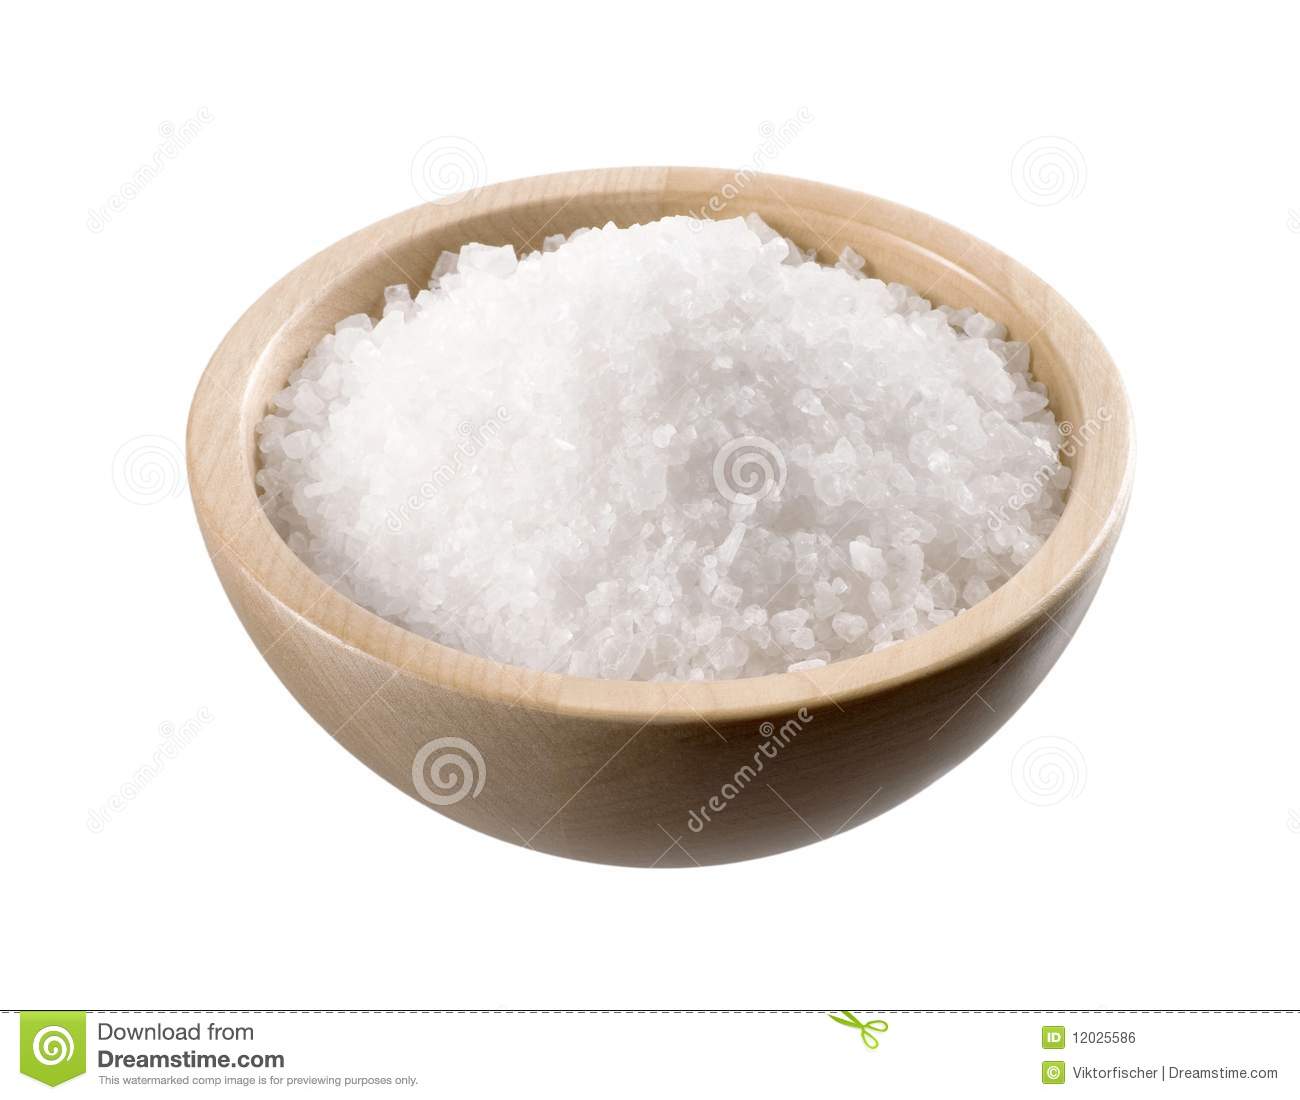 Sea Salt In A Wooden Bowl Royalty Free Stock Image   Image  12025586